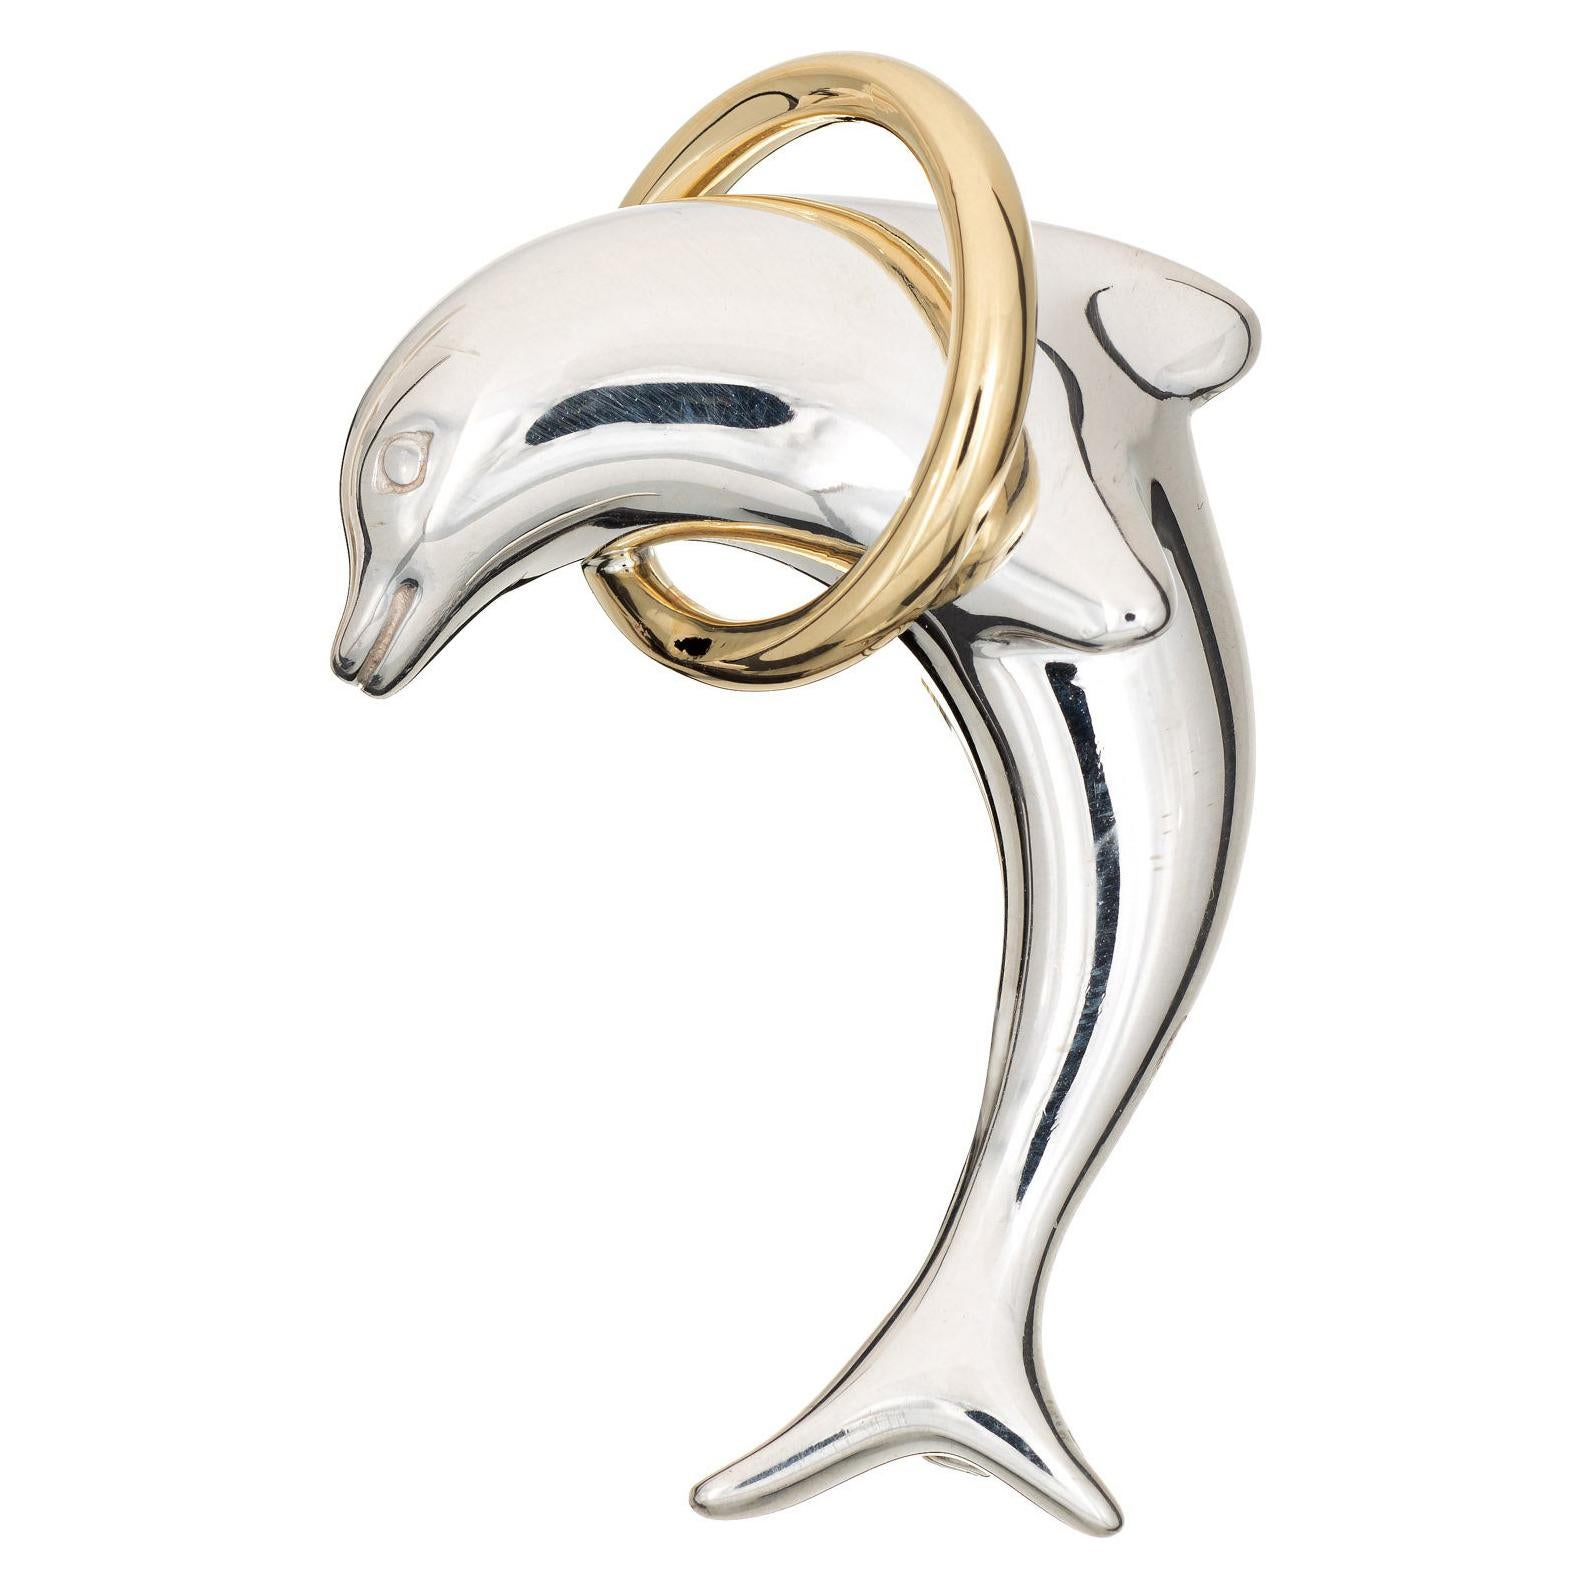 Tiffany & Co Dolphin Brooch Vintage Sterling Silver 18k Gold Signed Jewelry